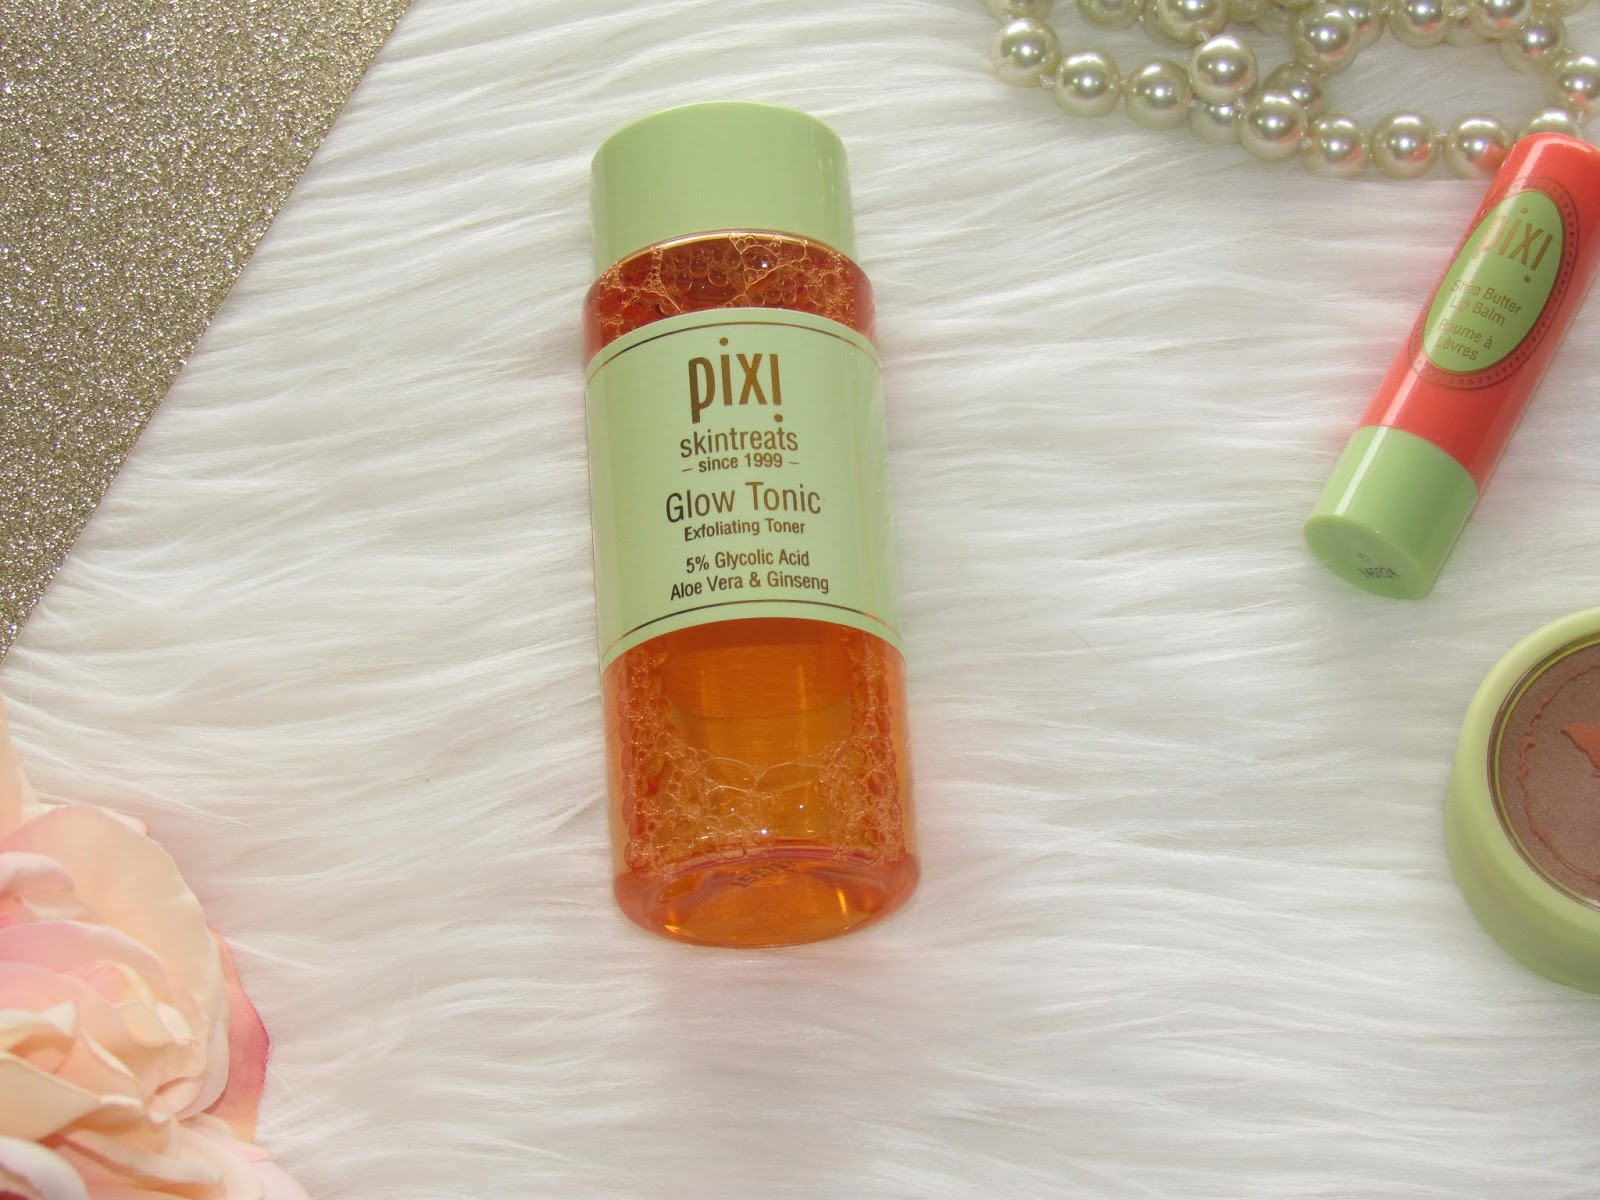 Do you have dull, acne prone skin? See the benefits of Pixi's Glow Tonic Toner...some call it a miracle-working toner! | beautywithlily.com